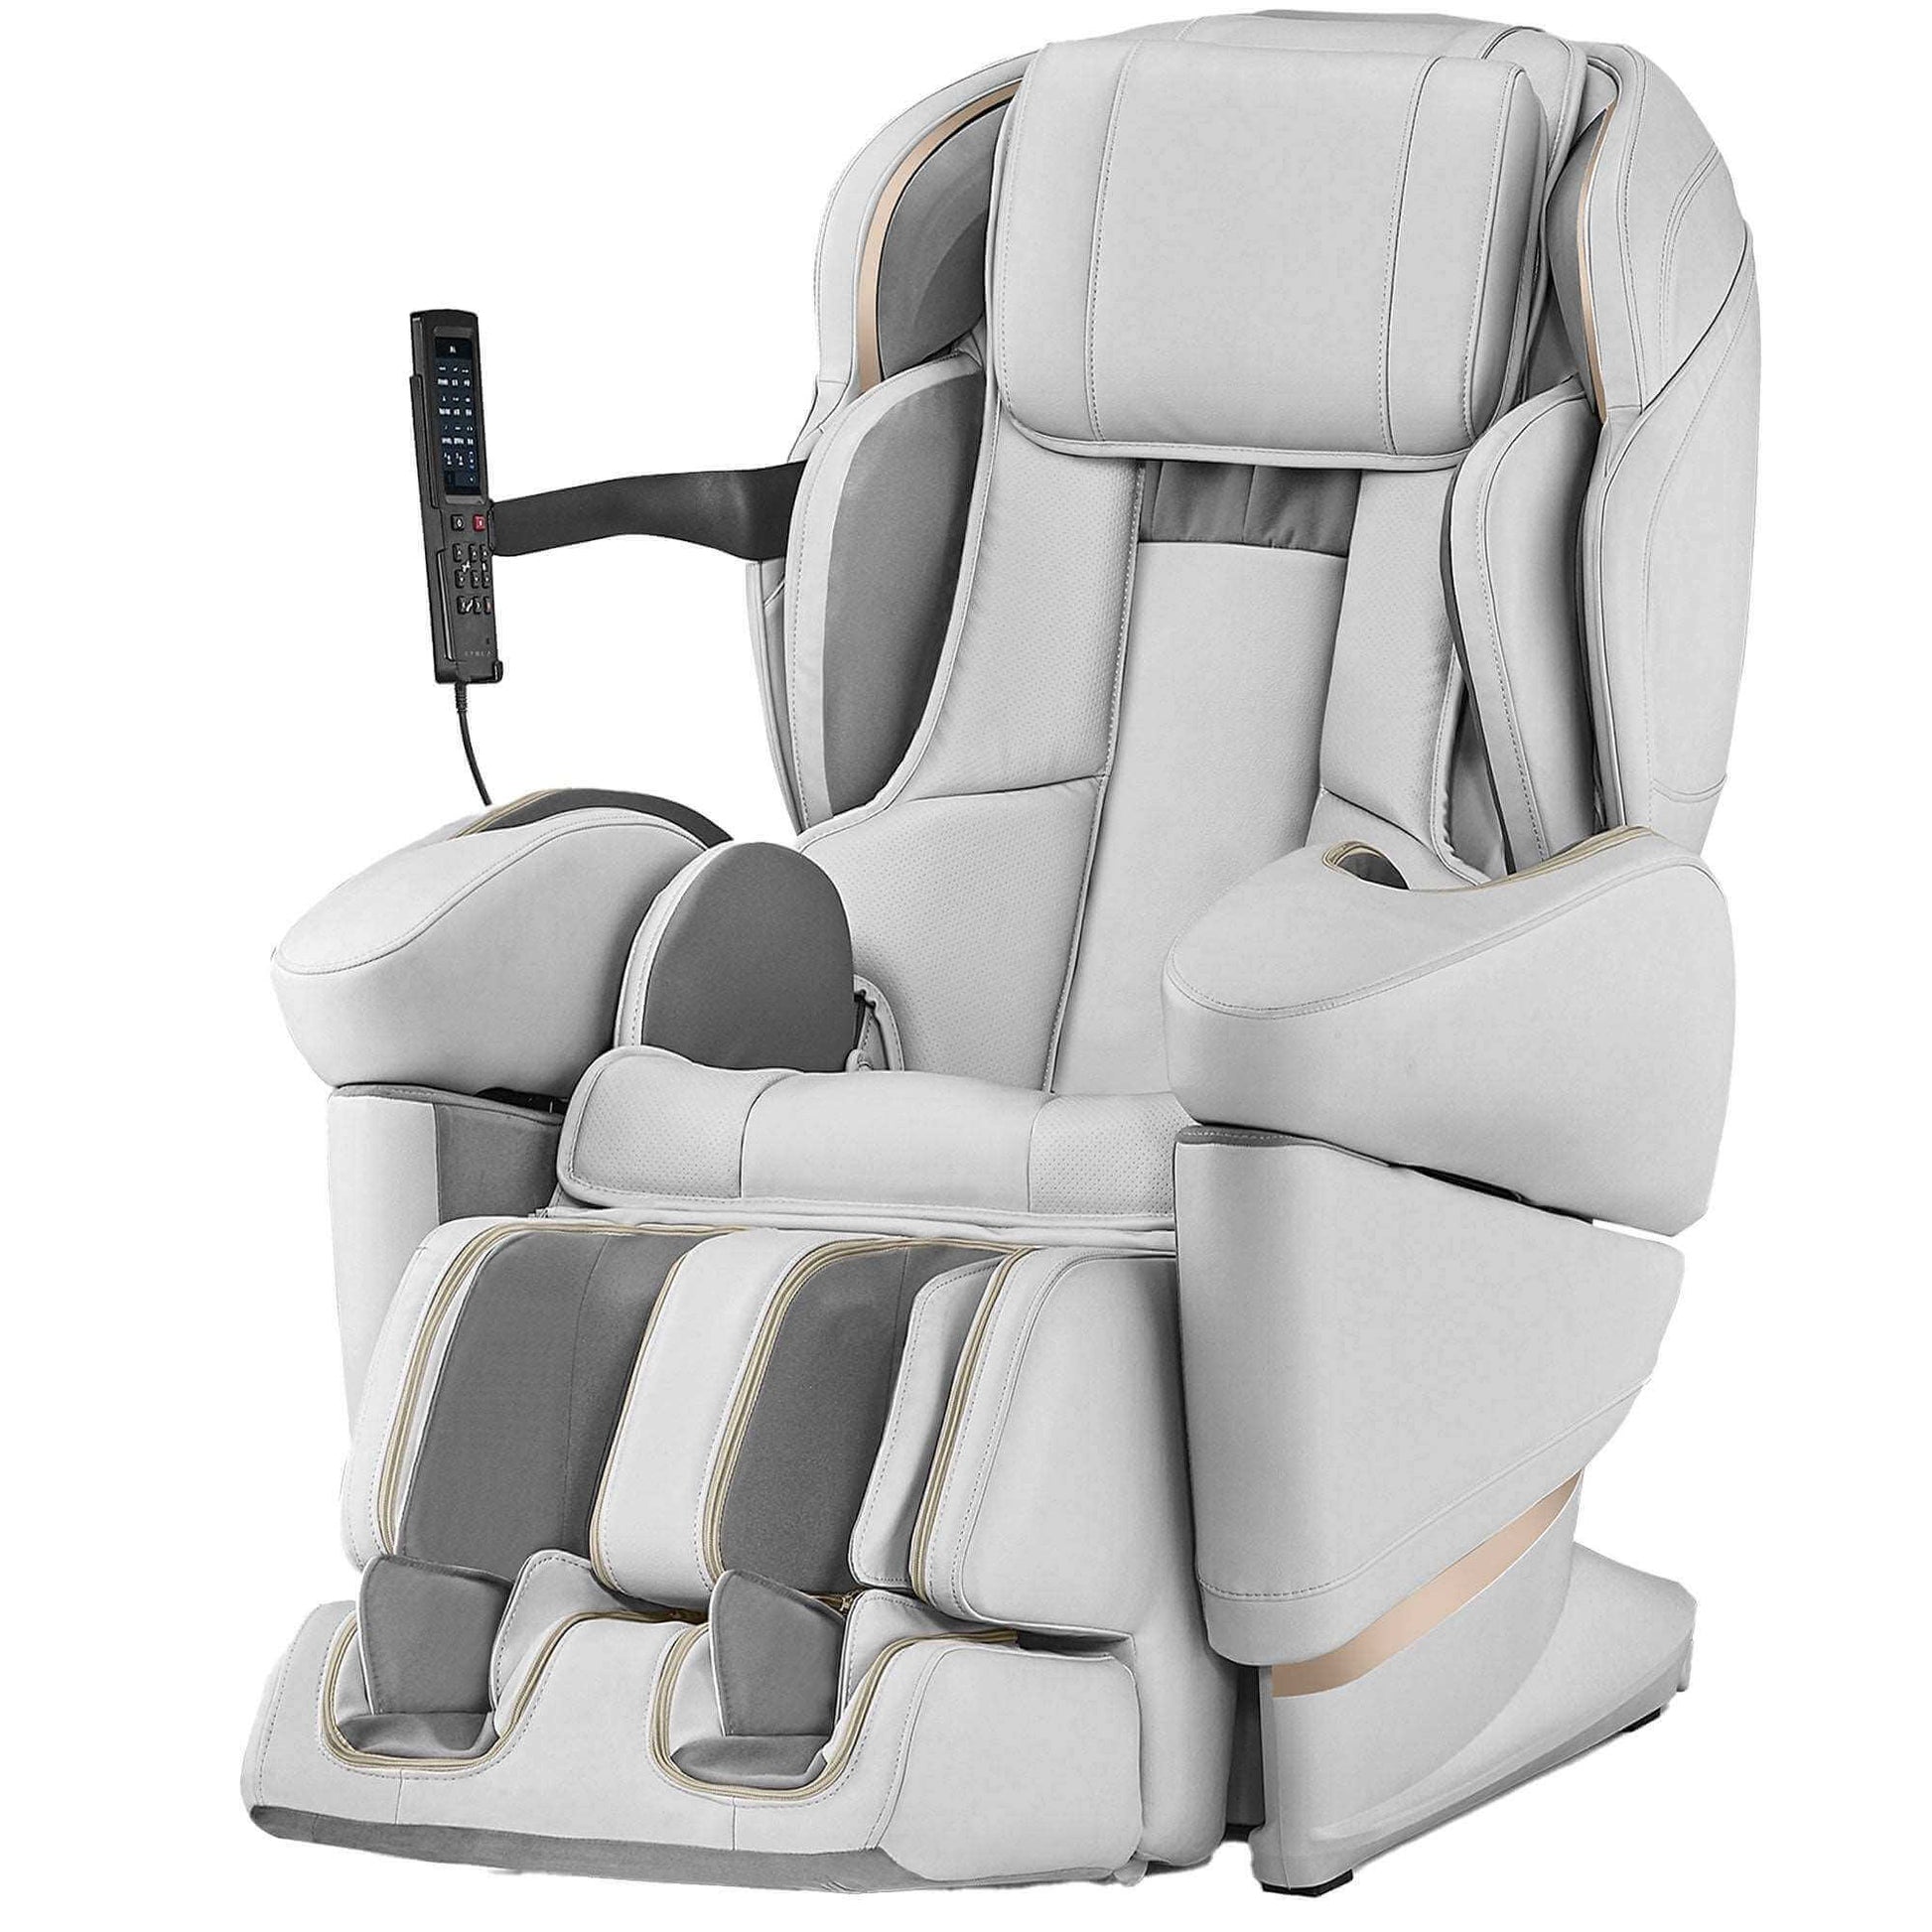 Synca Wellness JP3000 - 5D Ai Deluxe Zero Gravity Massage Chair - Electric Massaging Chairs